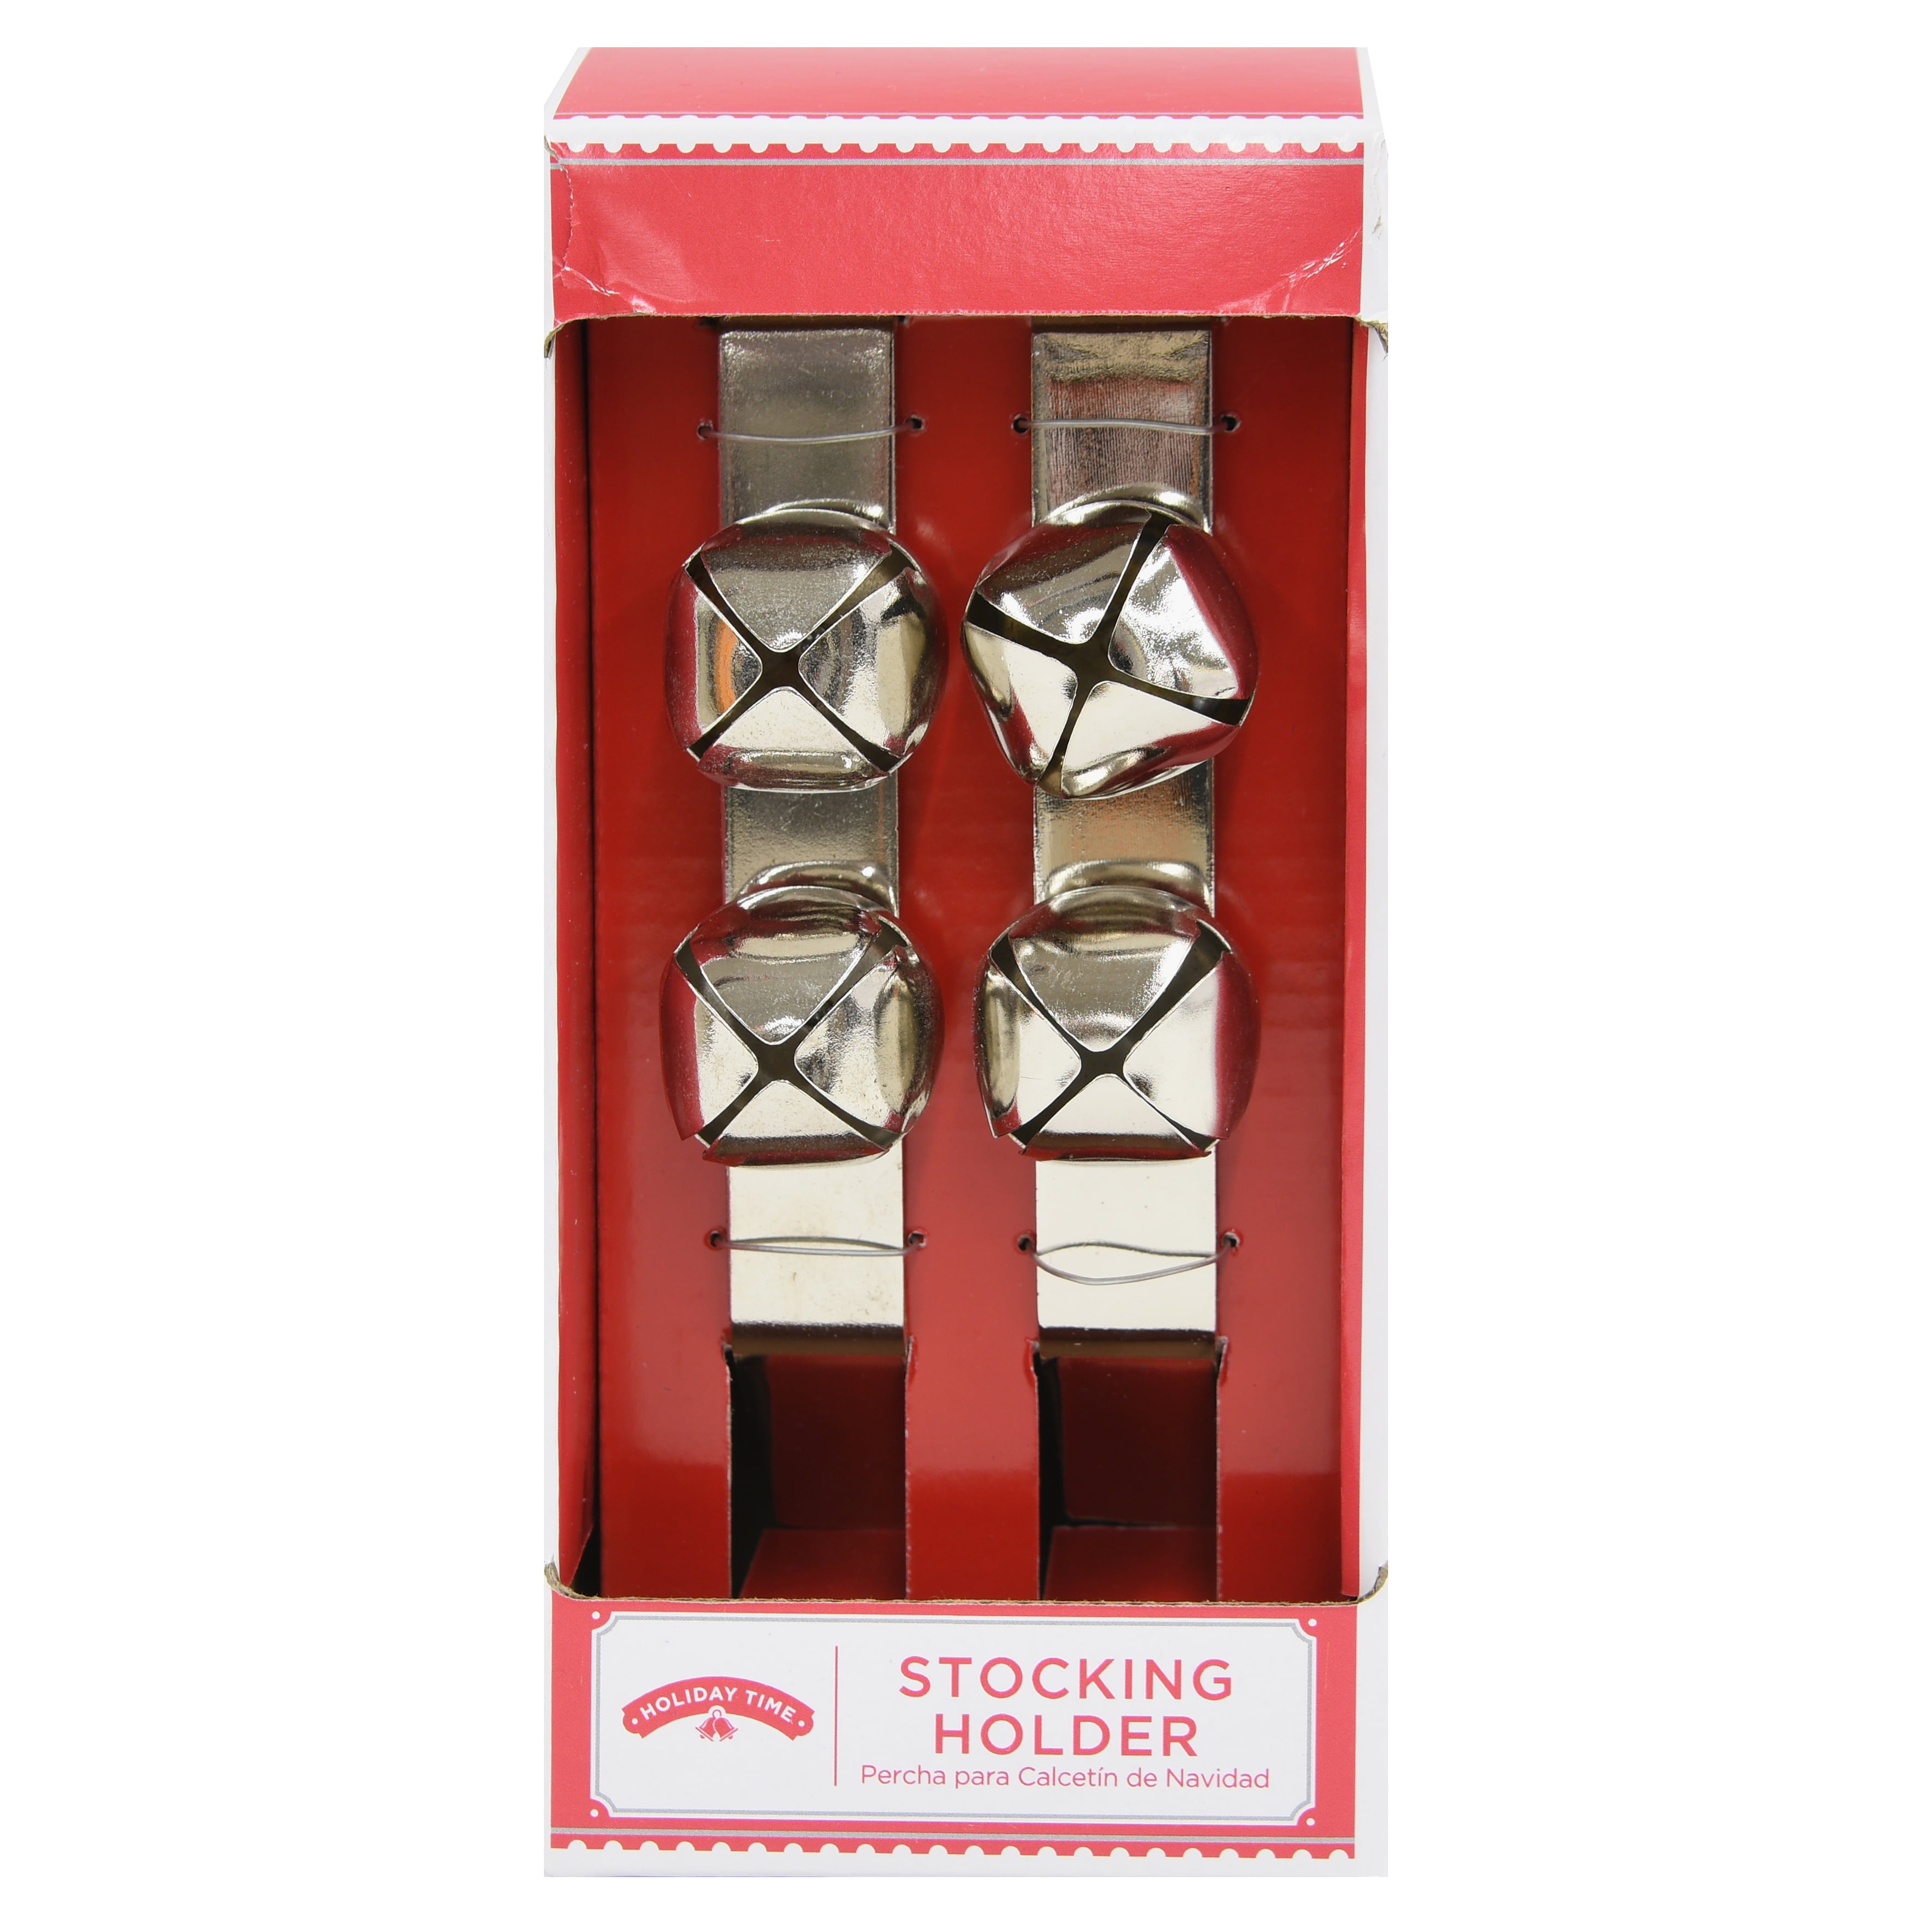 2-Pack Holiday Time Jingle Bell Stocking Holders (Silver) $4.00 + Free S&H w/ Walmart+ or $35+